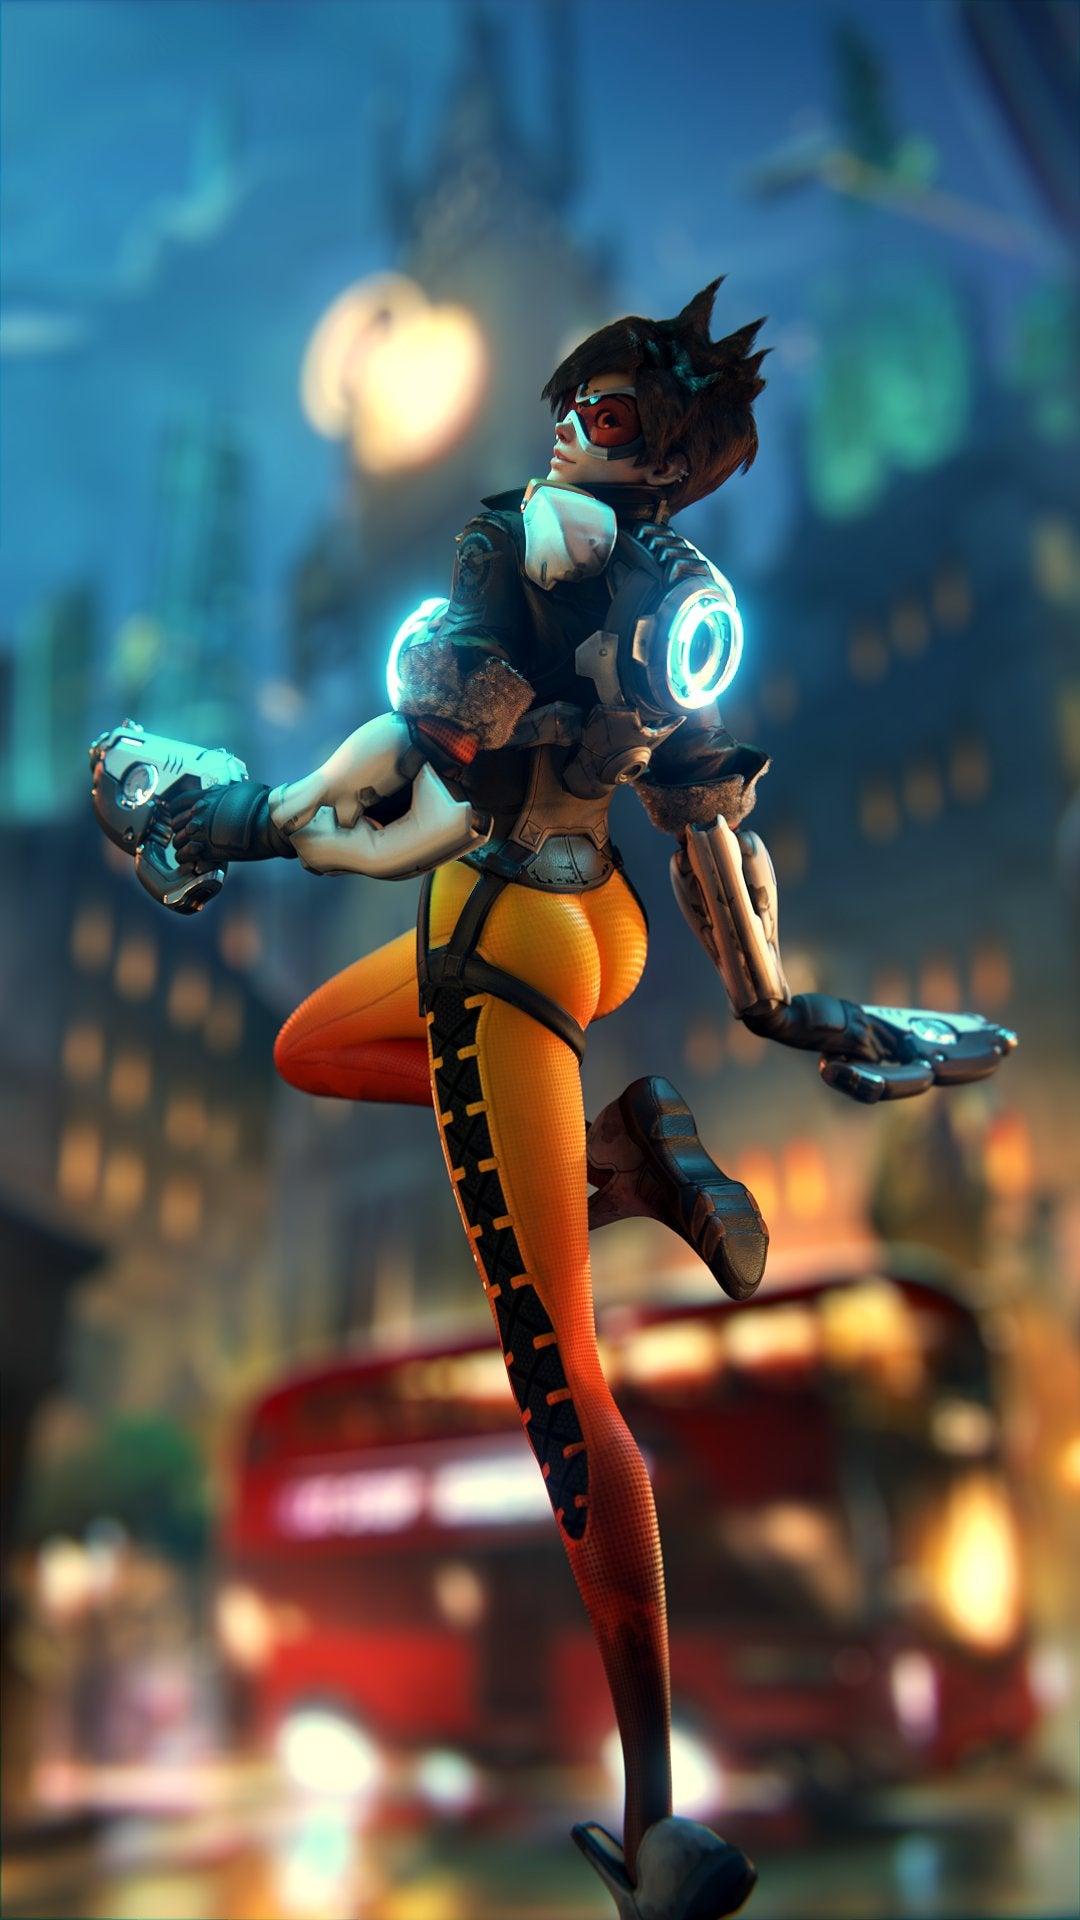 70+ Hot Pictures of Tracer From Overwatch 7